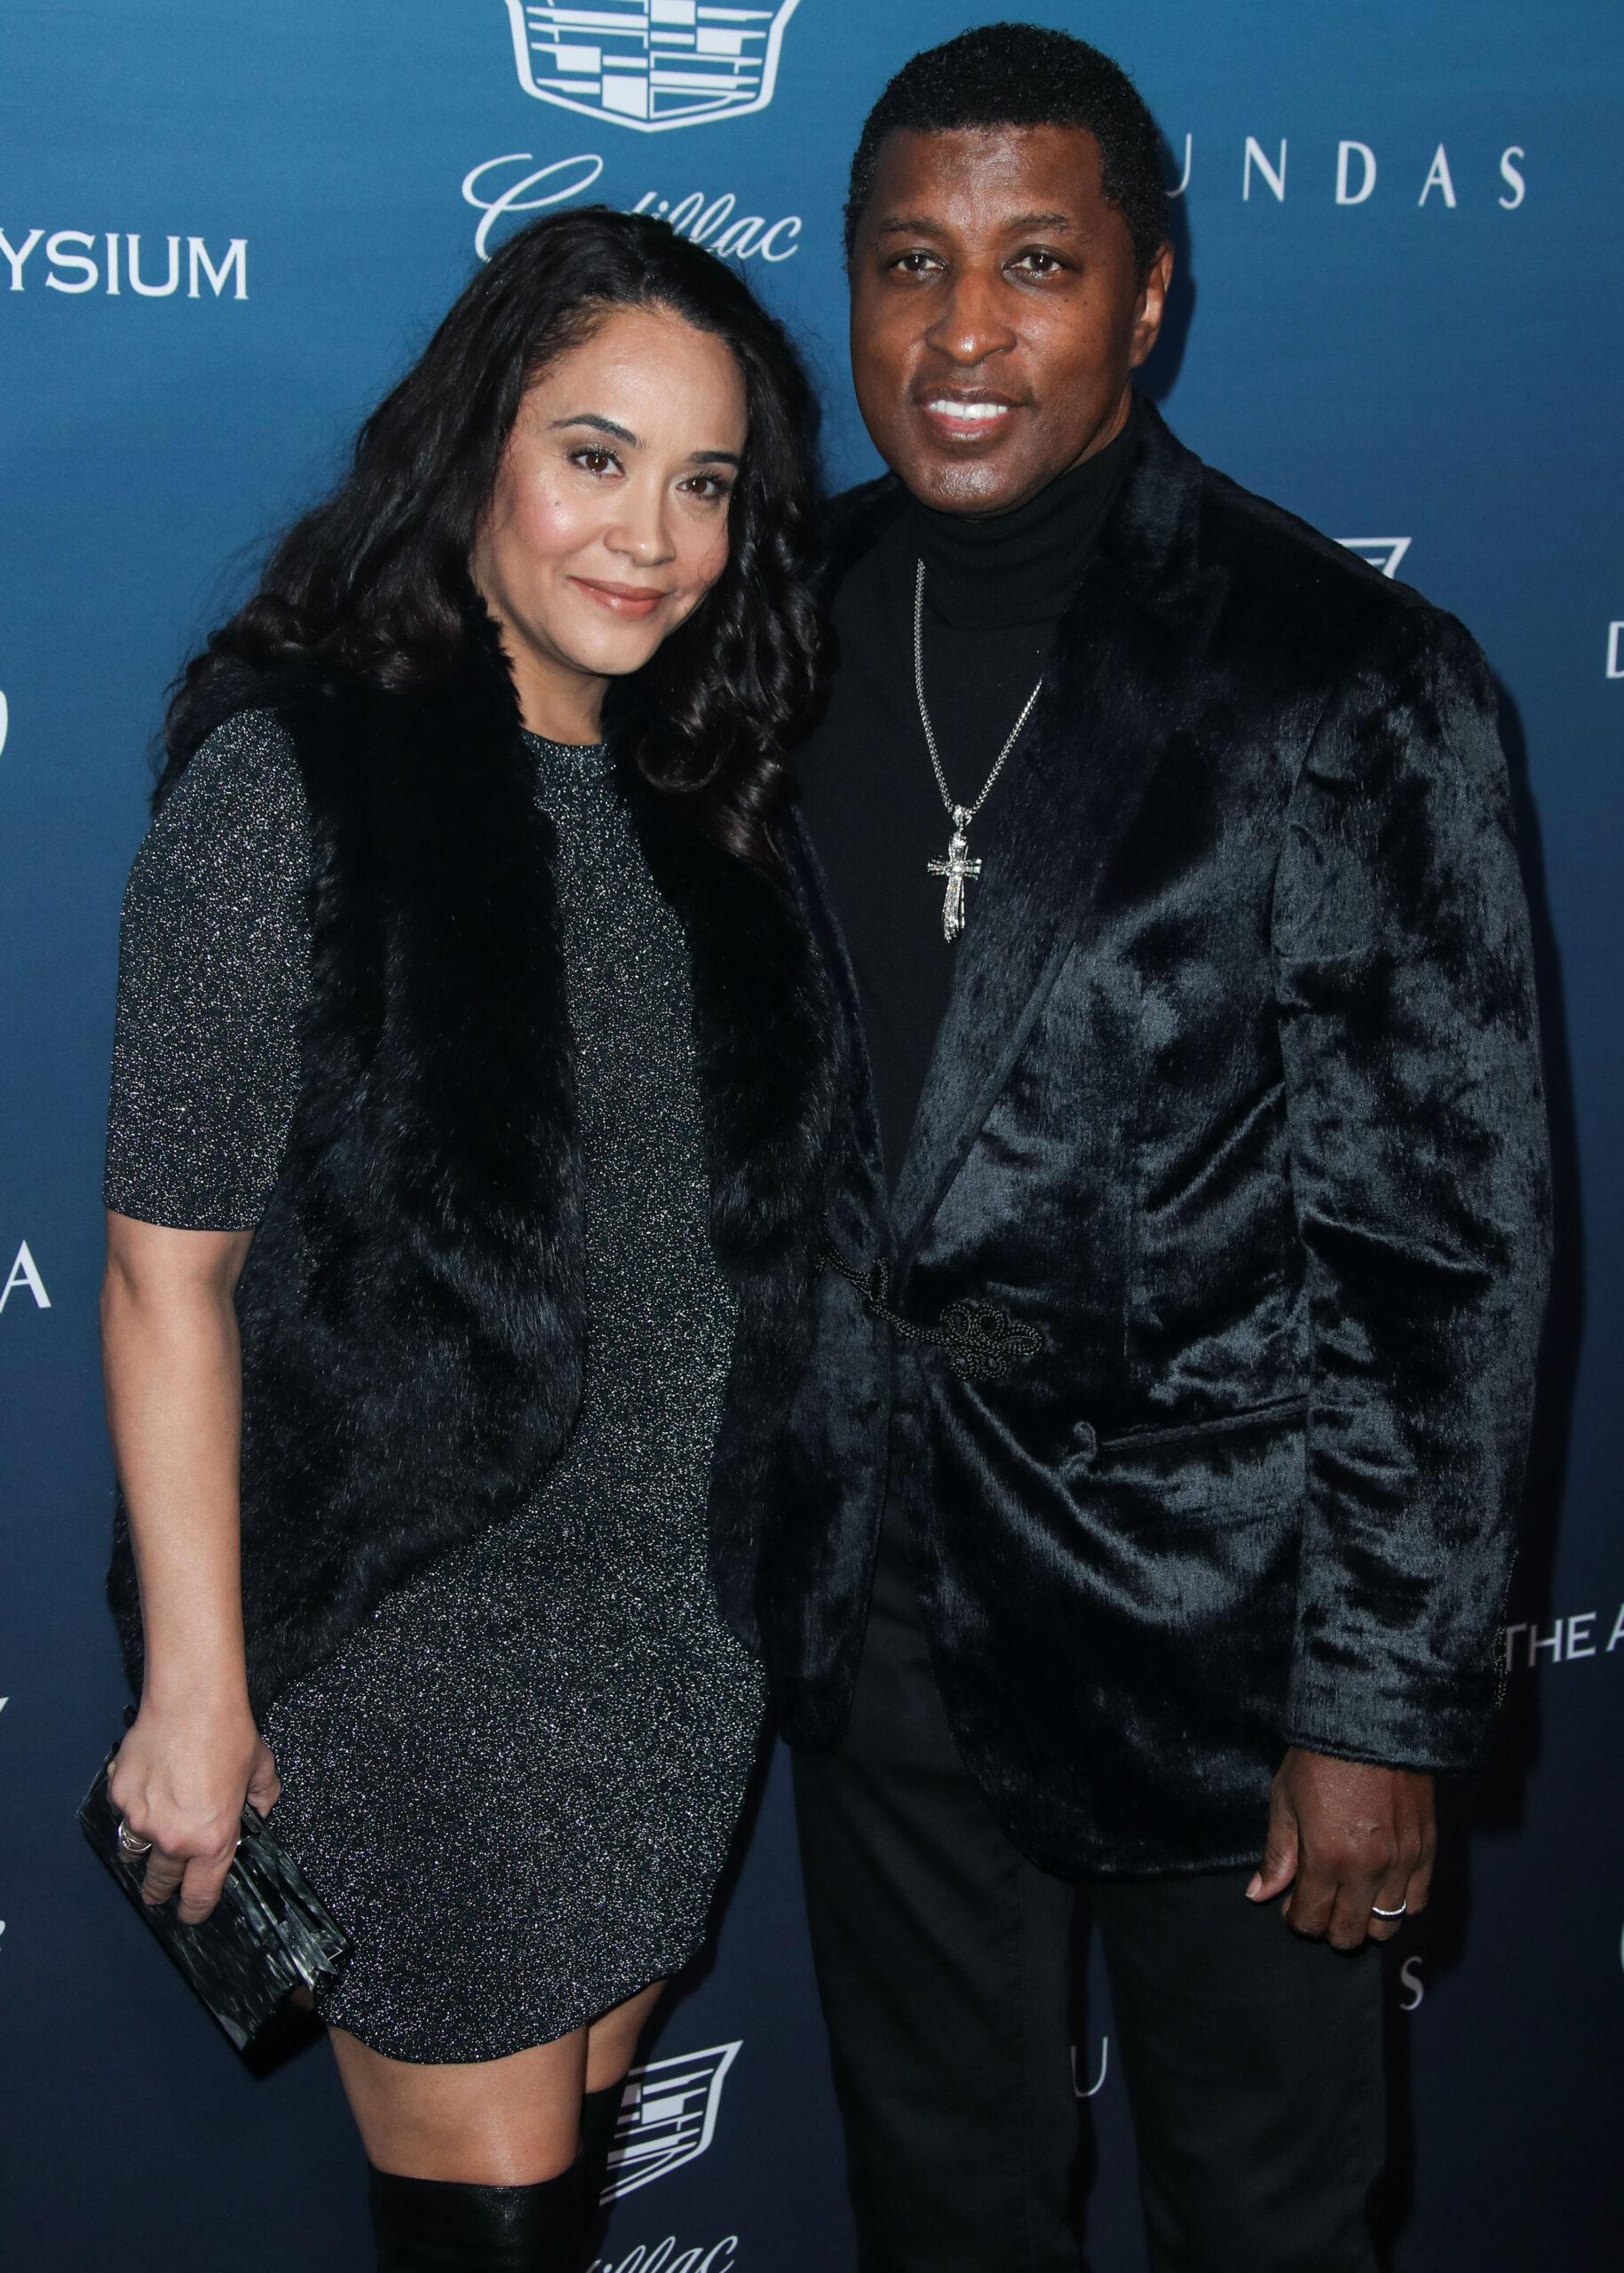 Babyface Edmonds And Wife, Nicole, Filing For Divorce